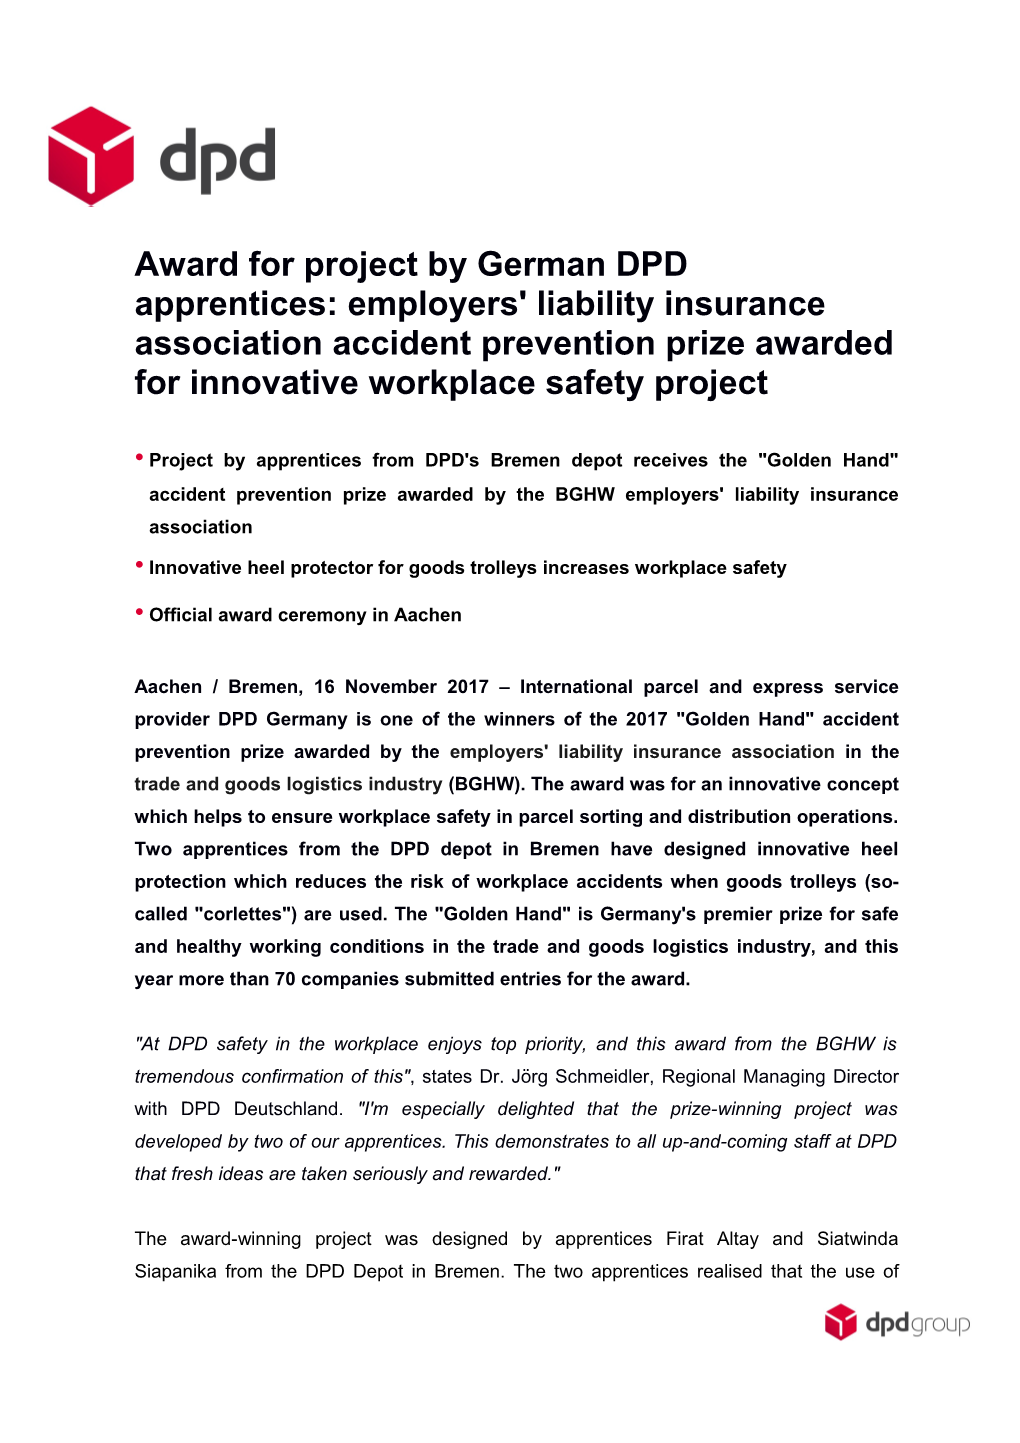 Award for Project by German DPD Apprentices: Employers' Liability Insurance Association